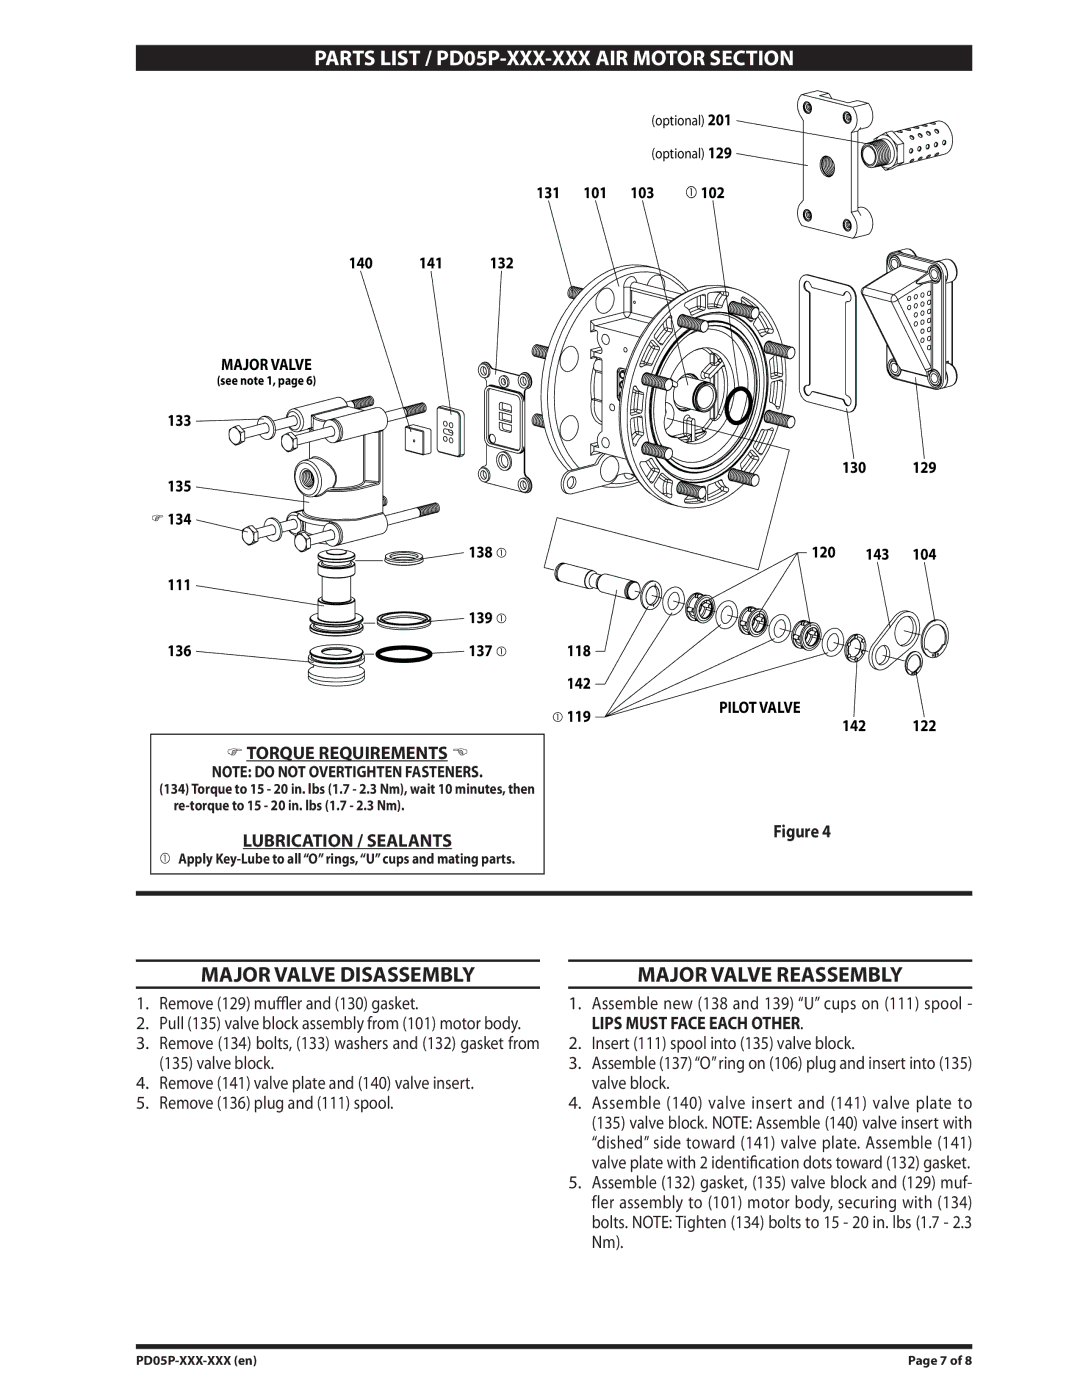 Ingersoll-Rand PD05P-XXX-XXX manual Major Valve Disassembly, Major Valve Reassembly, Torque Requirements 